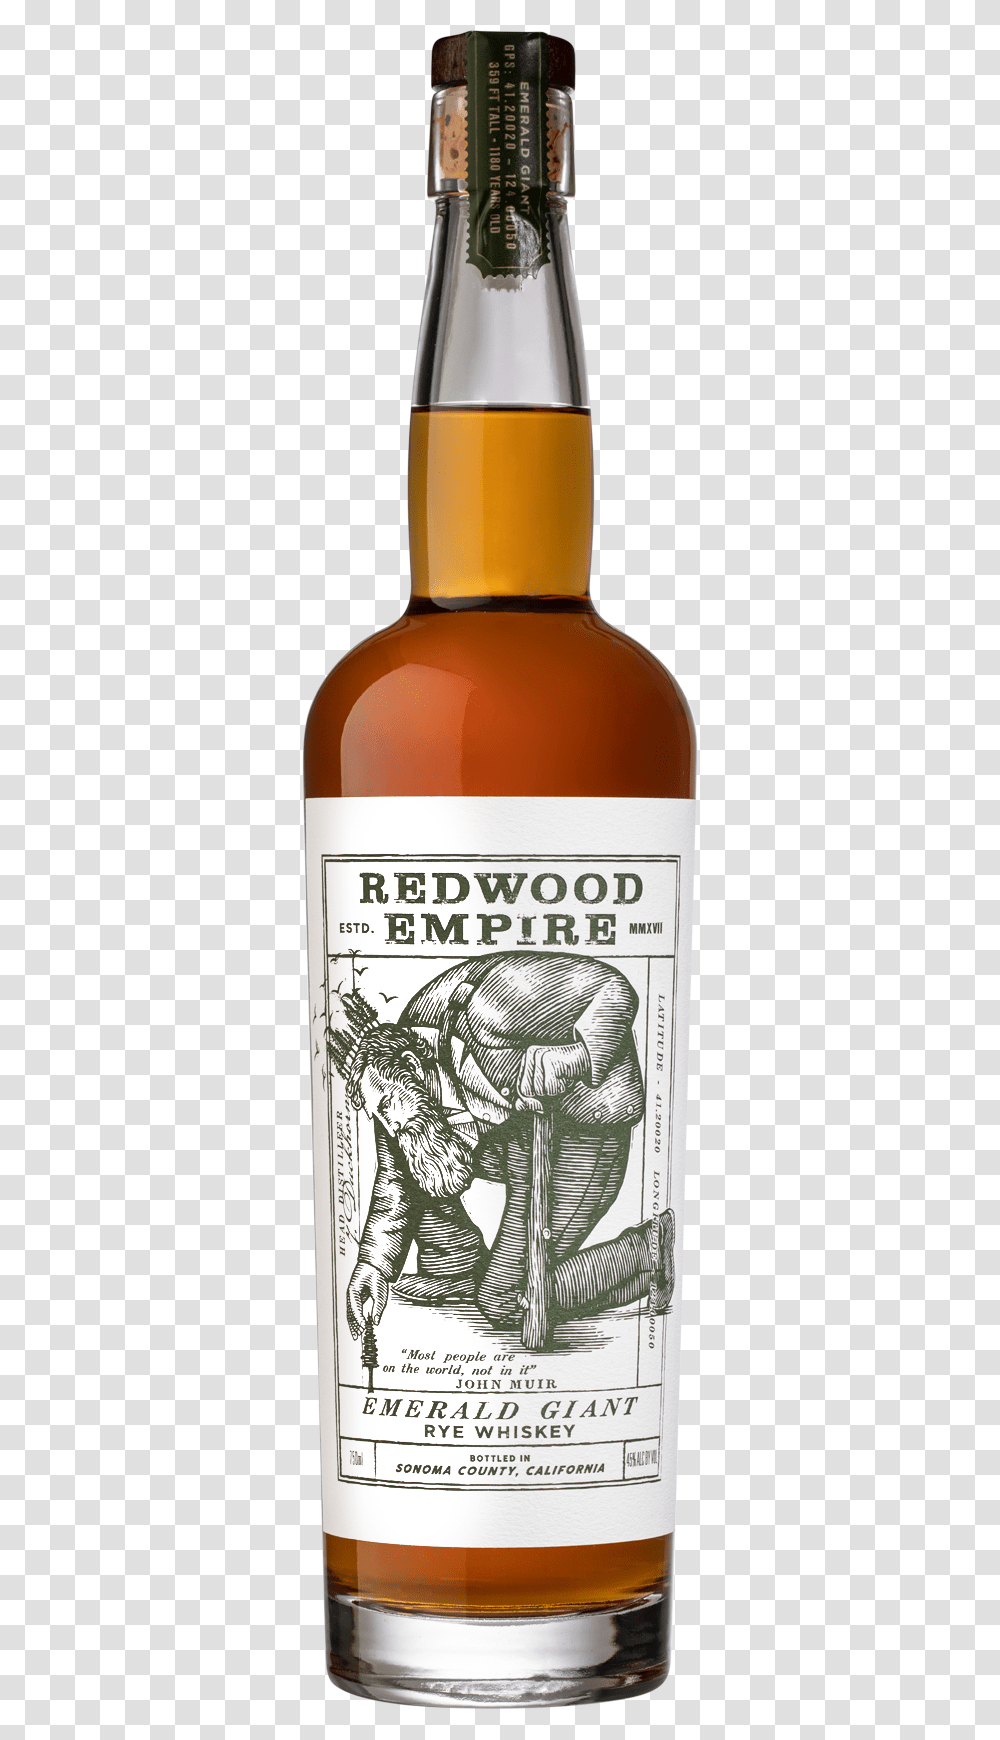 Redwood Empire Emerald Giant Rye Whiskey Redwood Empire Emerald Giant, Liquor, Alcohol, Beverage, Drink Transparent Png